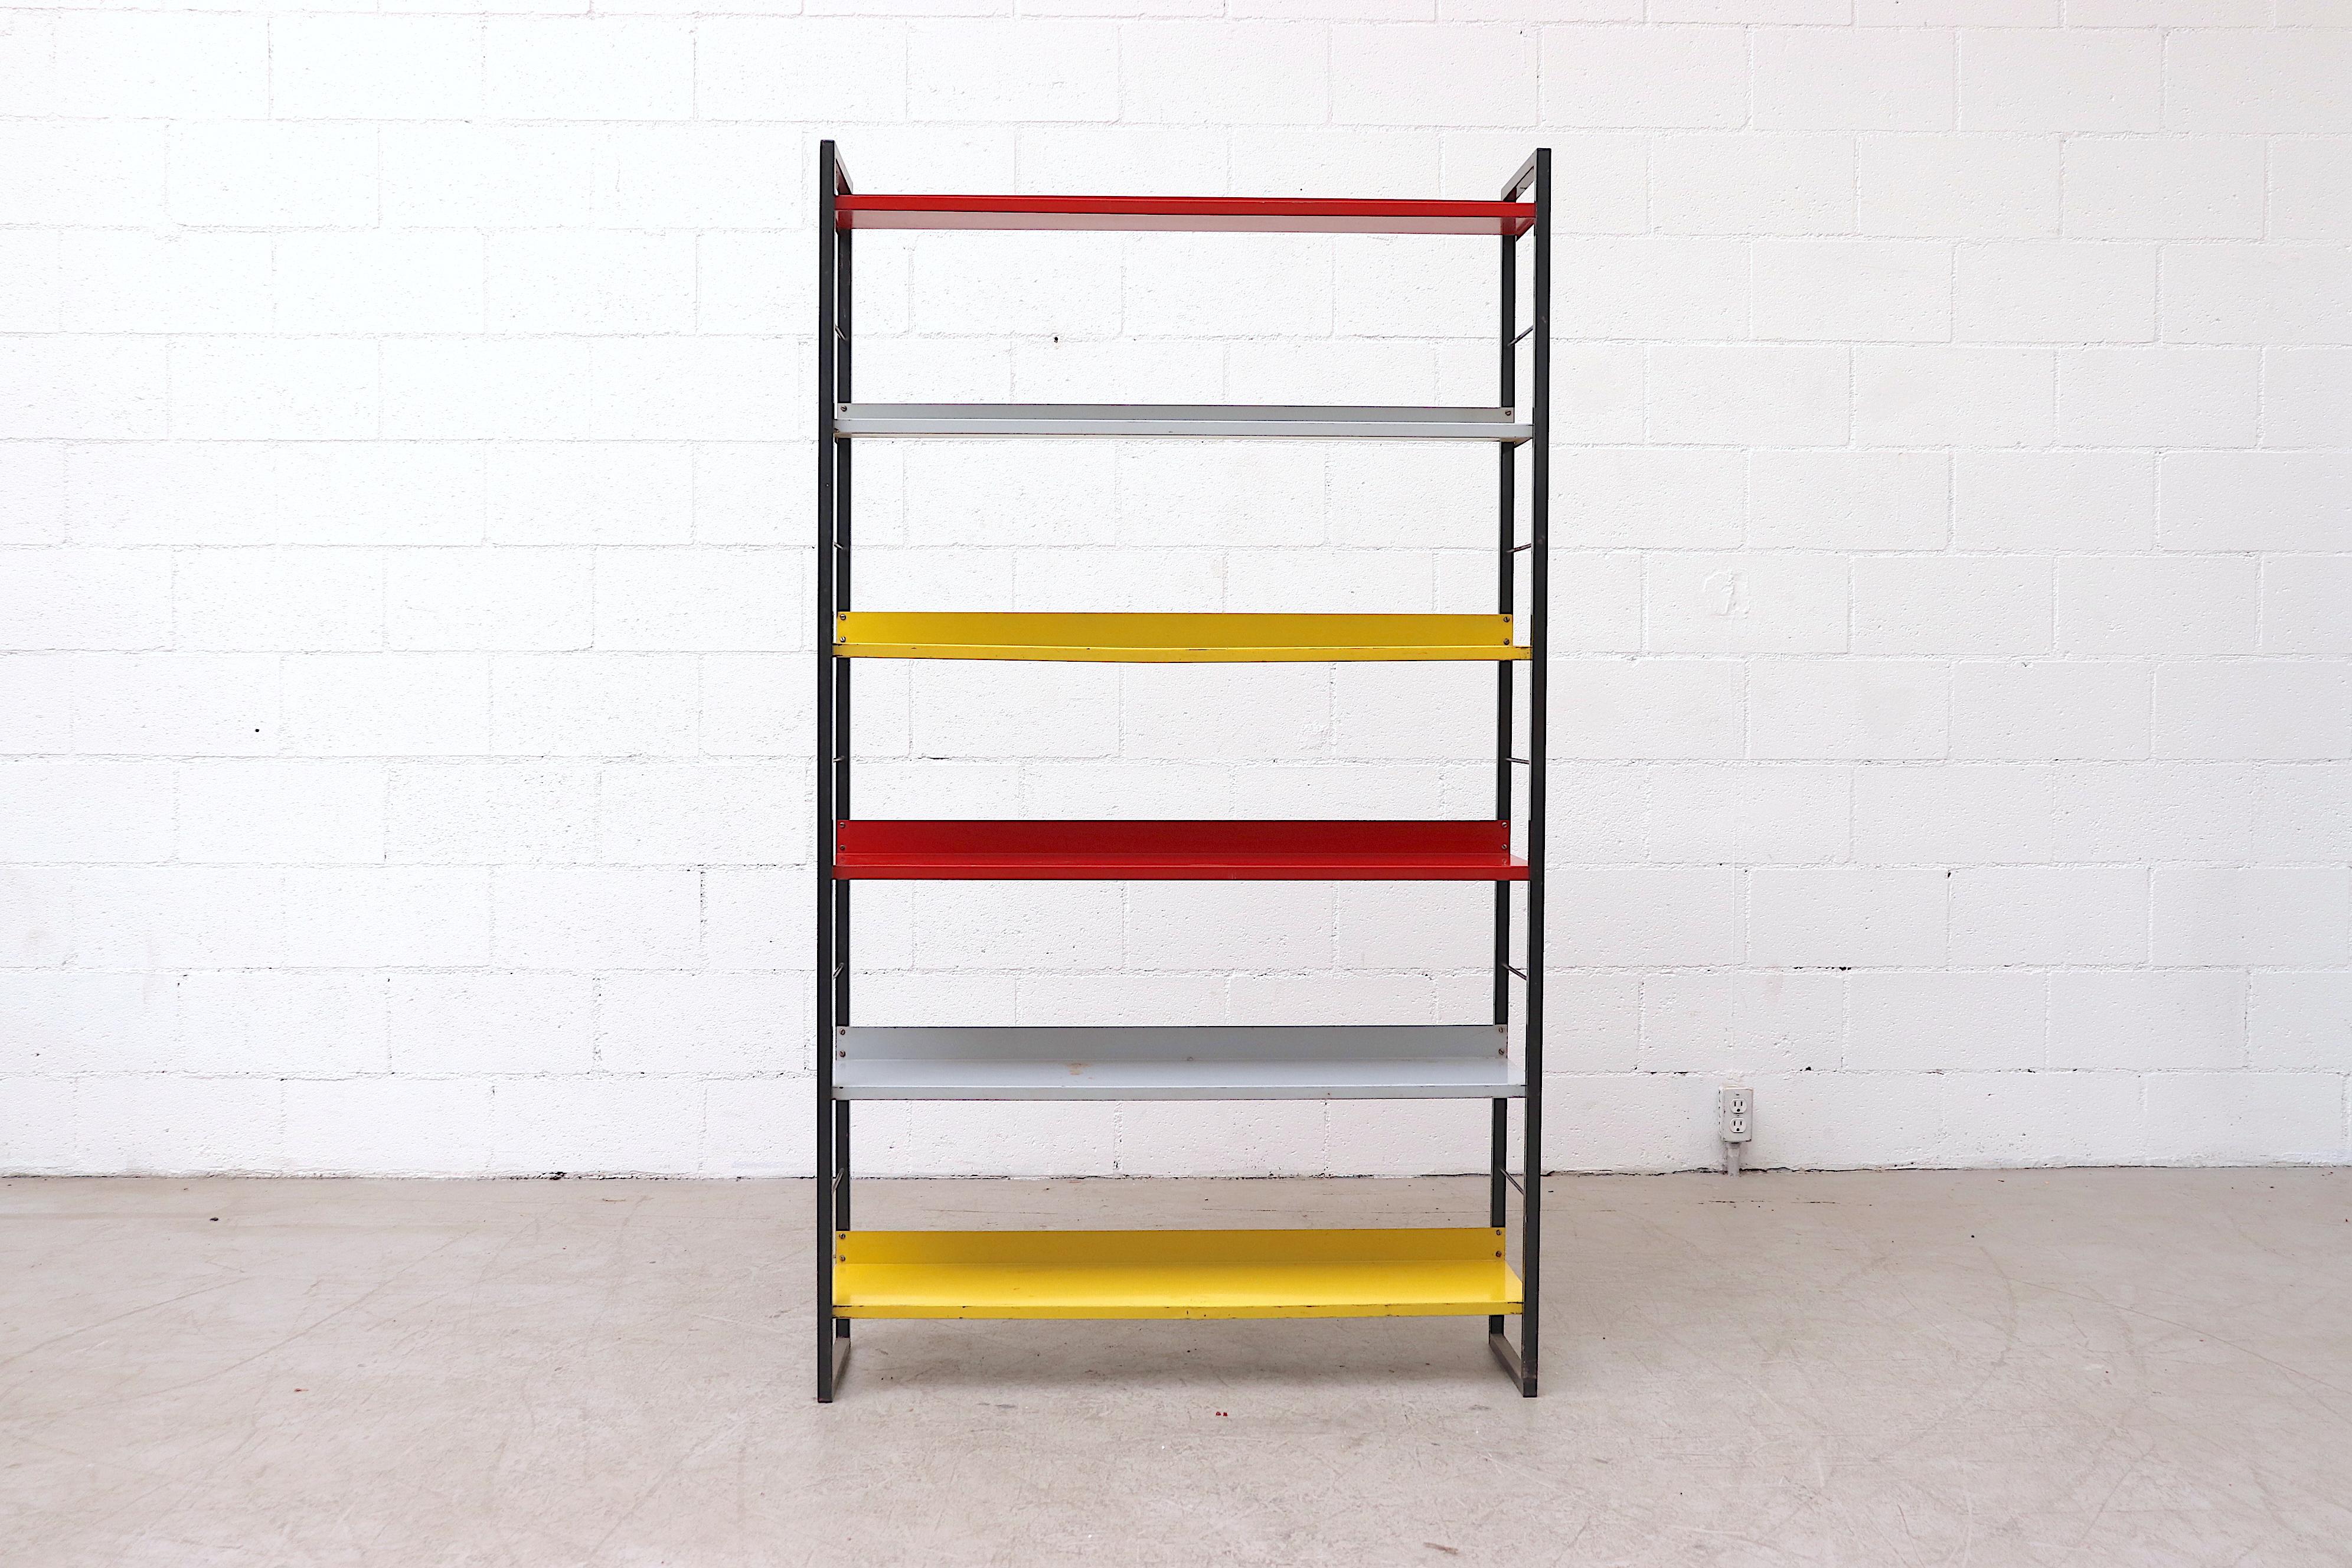 From famed Dutch Manufacturer Tomado (An acronym for Van der TOgt Massa Artikelen DOrdrecht meaning Van Der Togt Mass Articles Dordrecht - Dordrecht being the city the company originated from) comes this enameled metal standing book shelf with